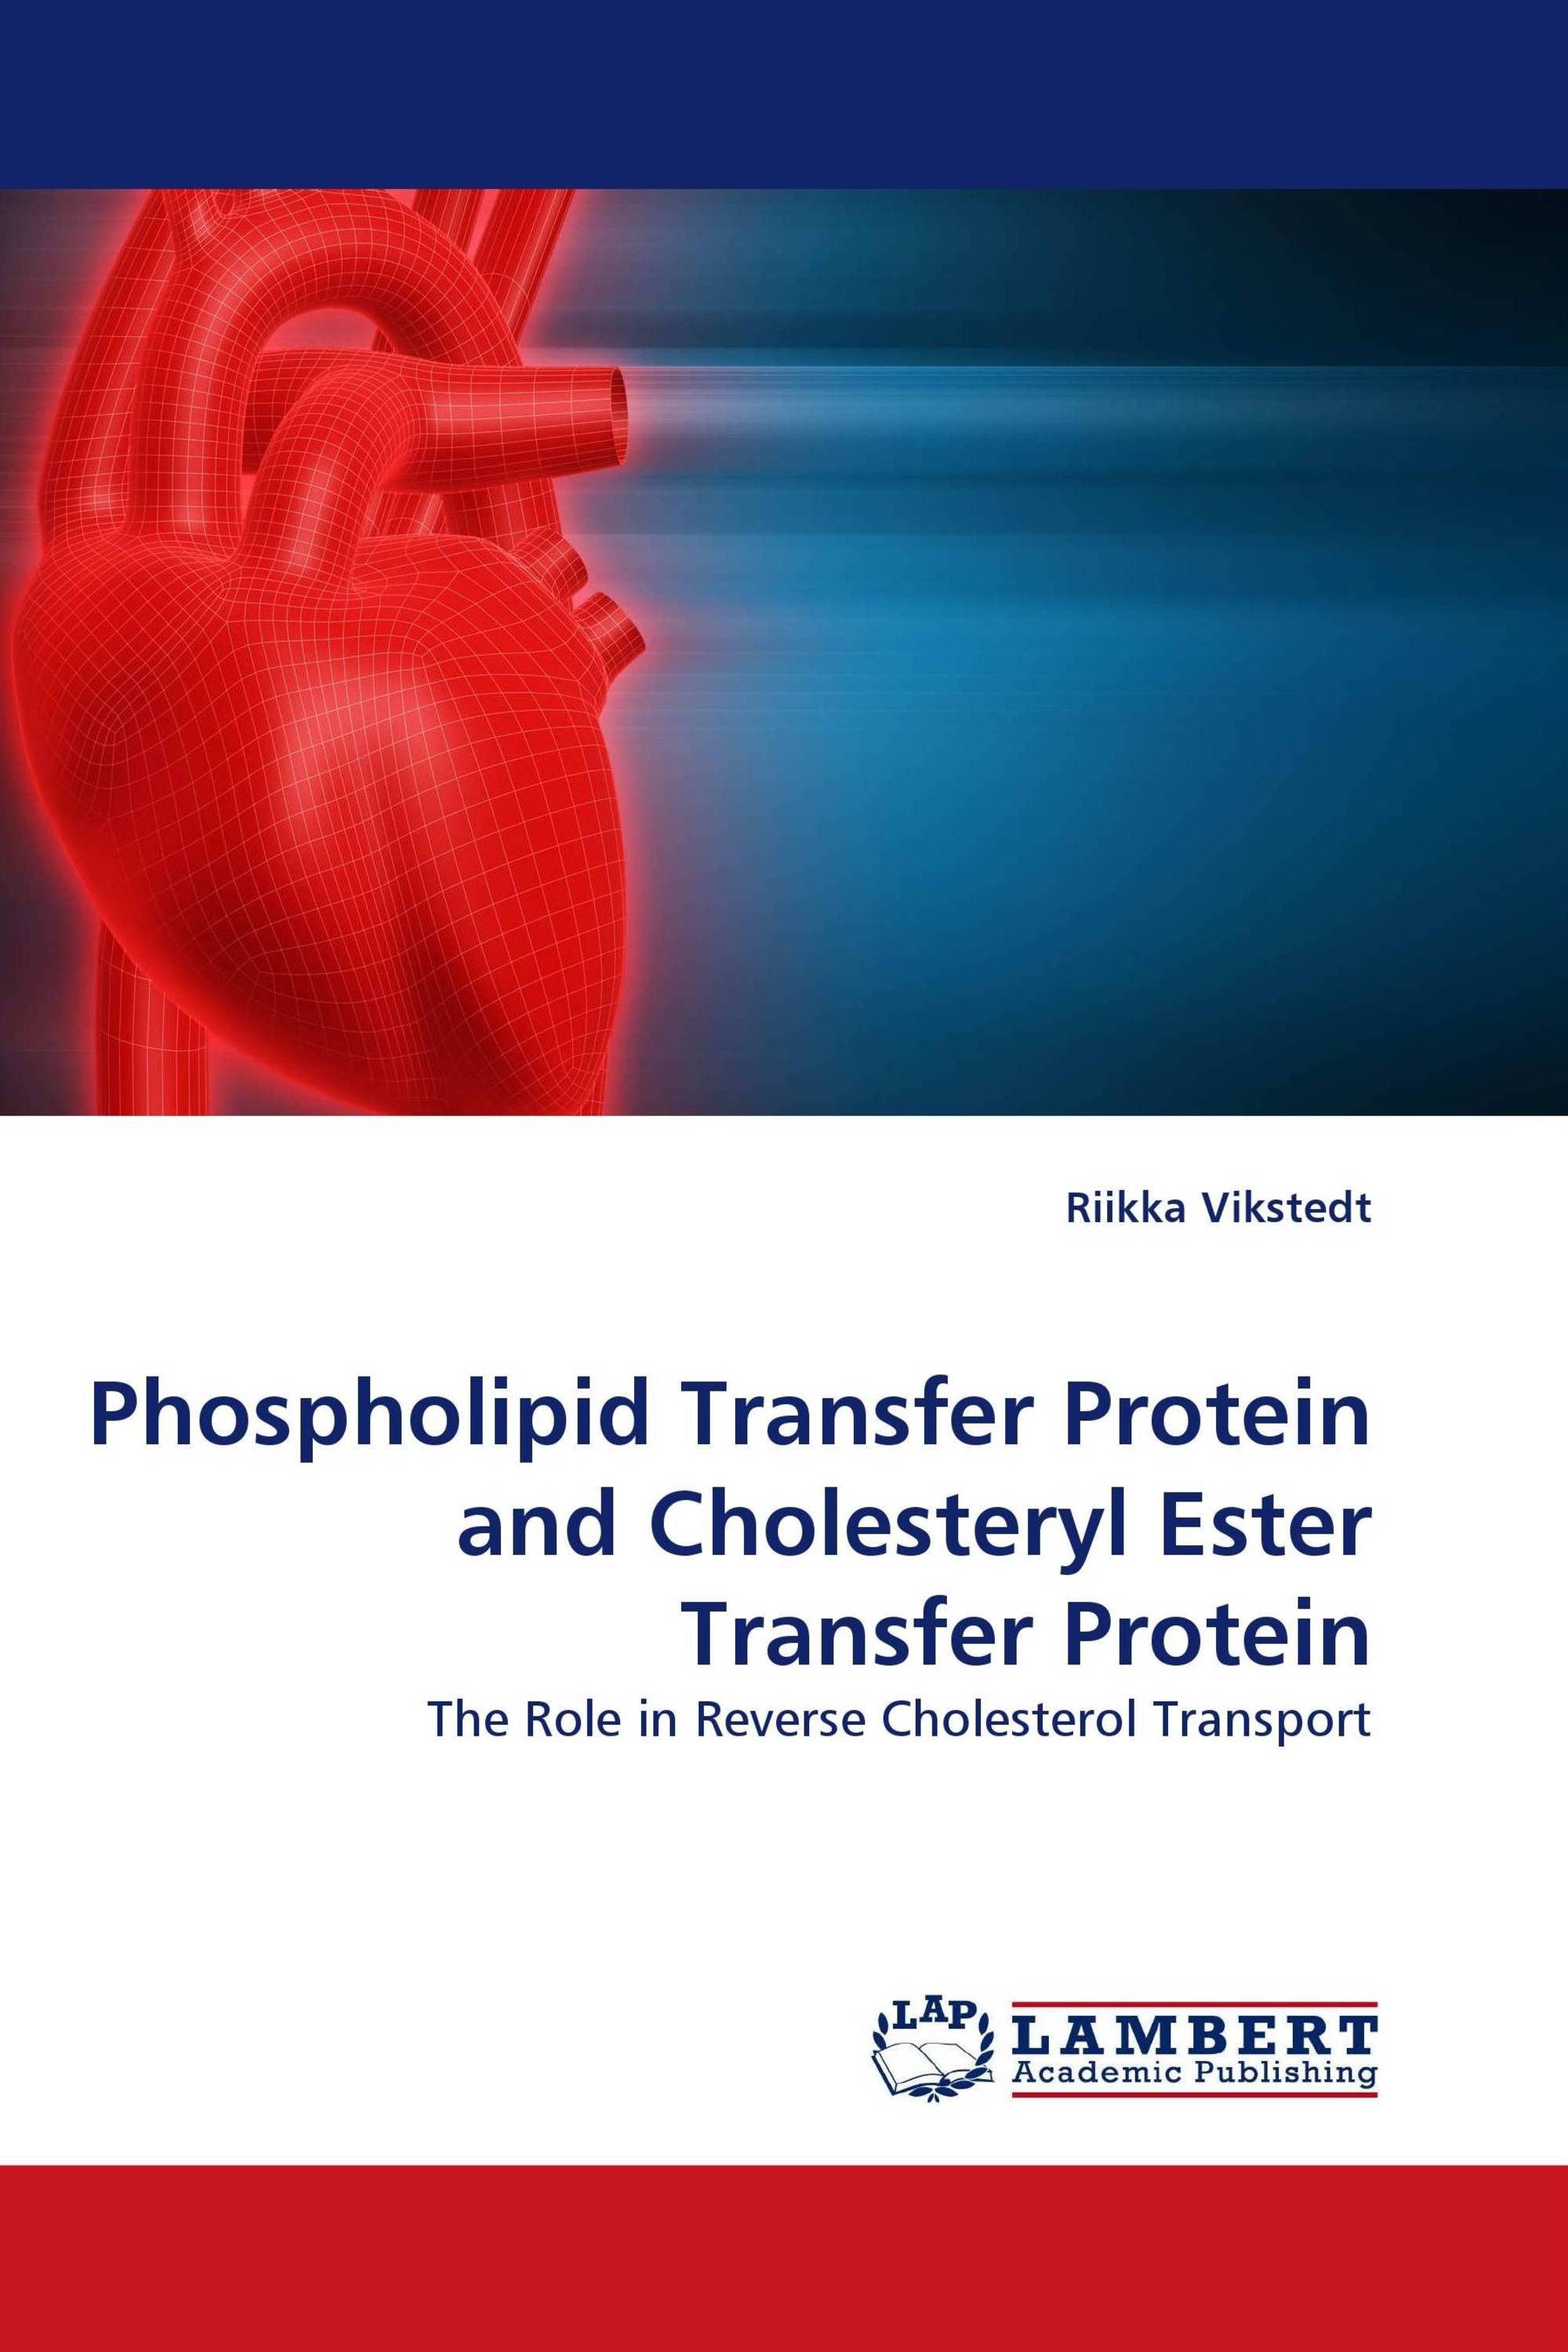 Phospholipid Transfer Protein and Cholesteryl Ester Transfer Protein